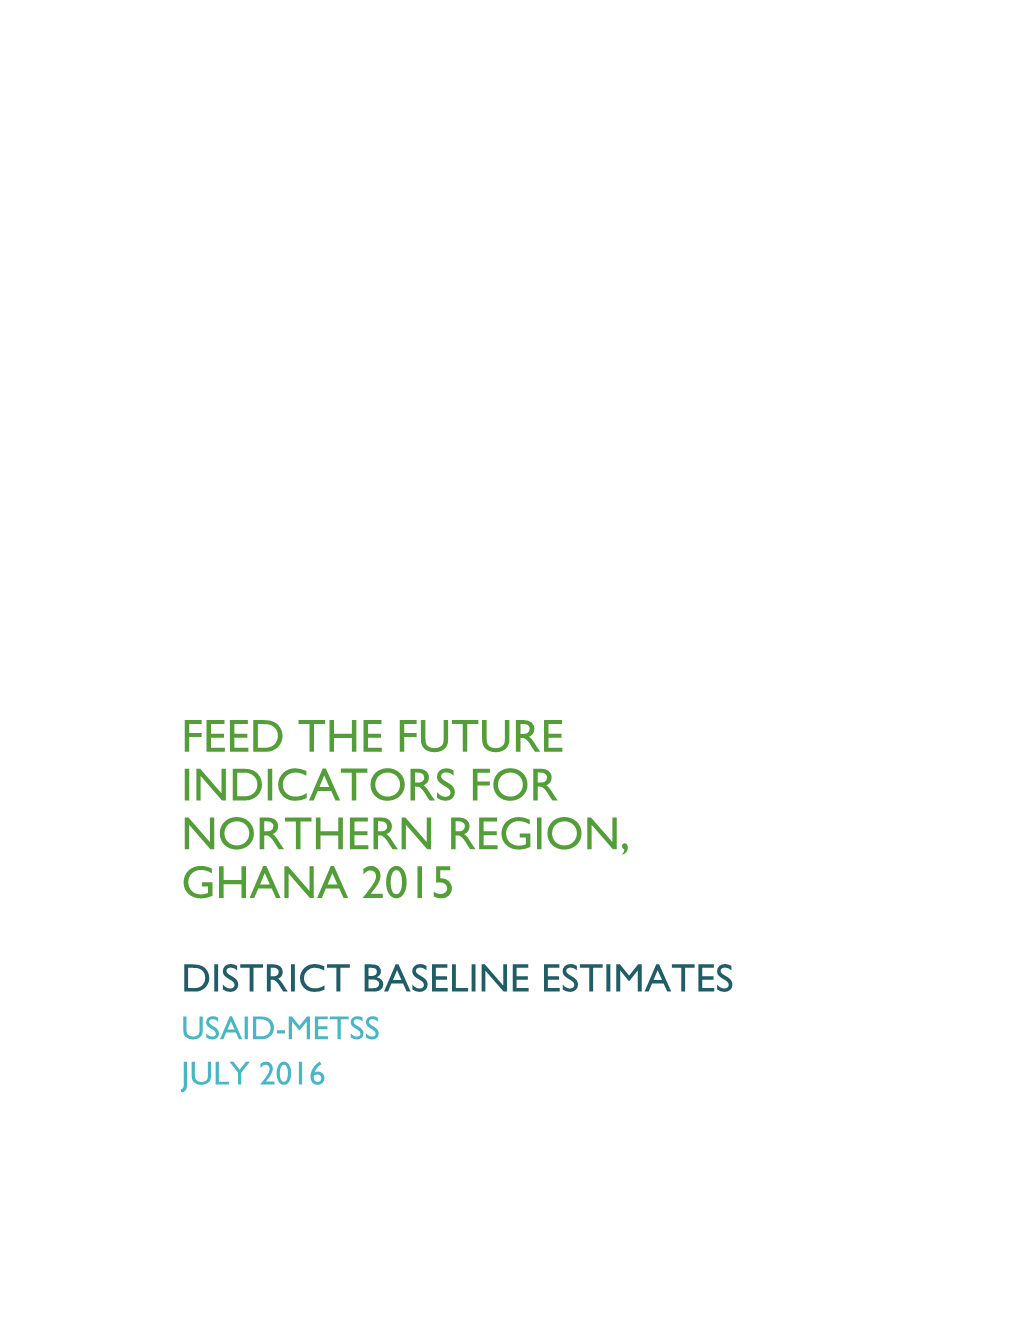 Feed the Future Indicators for Northern Region, Ghana 2015 District Baseline Estimates